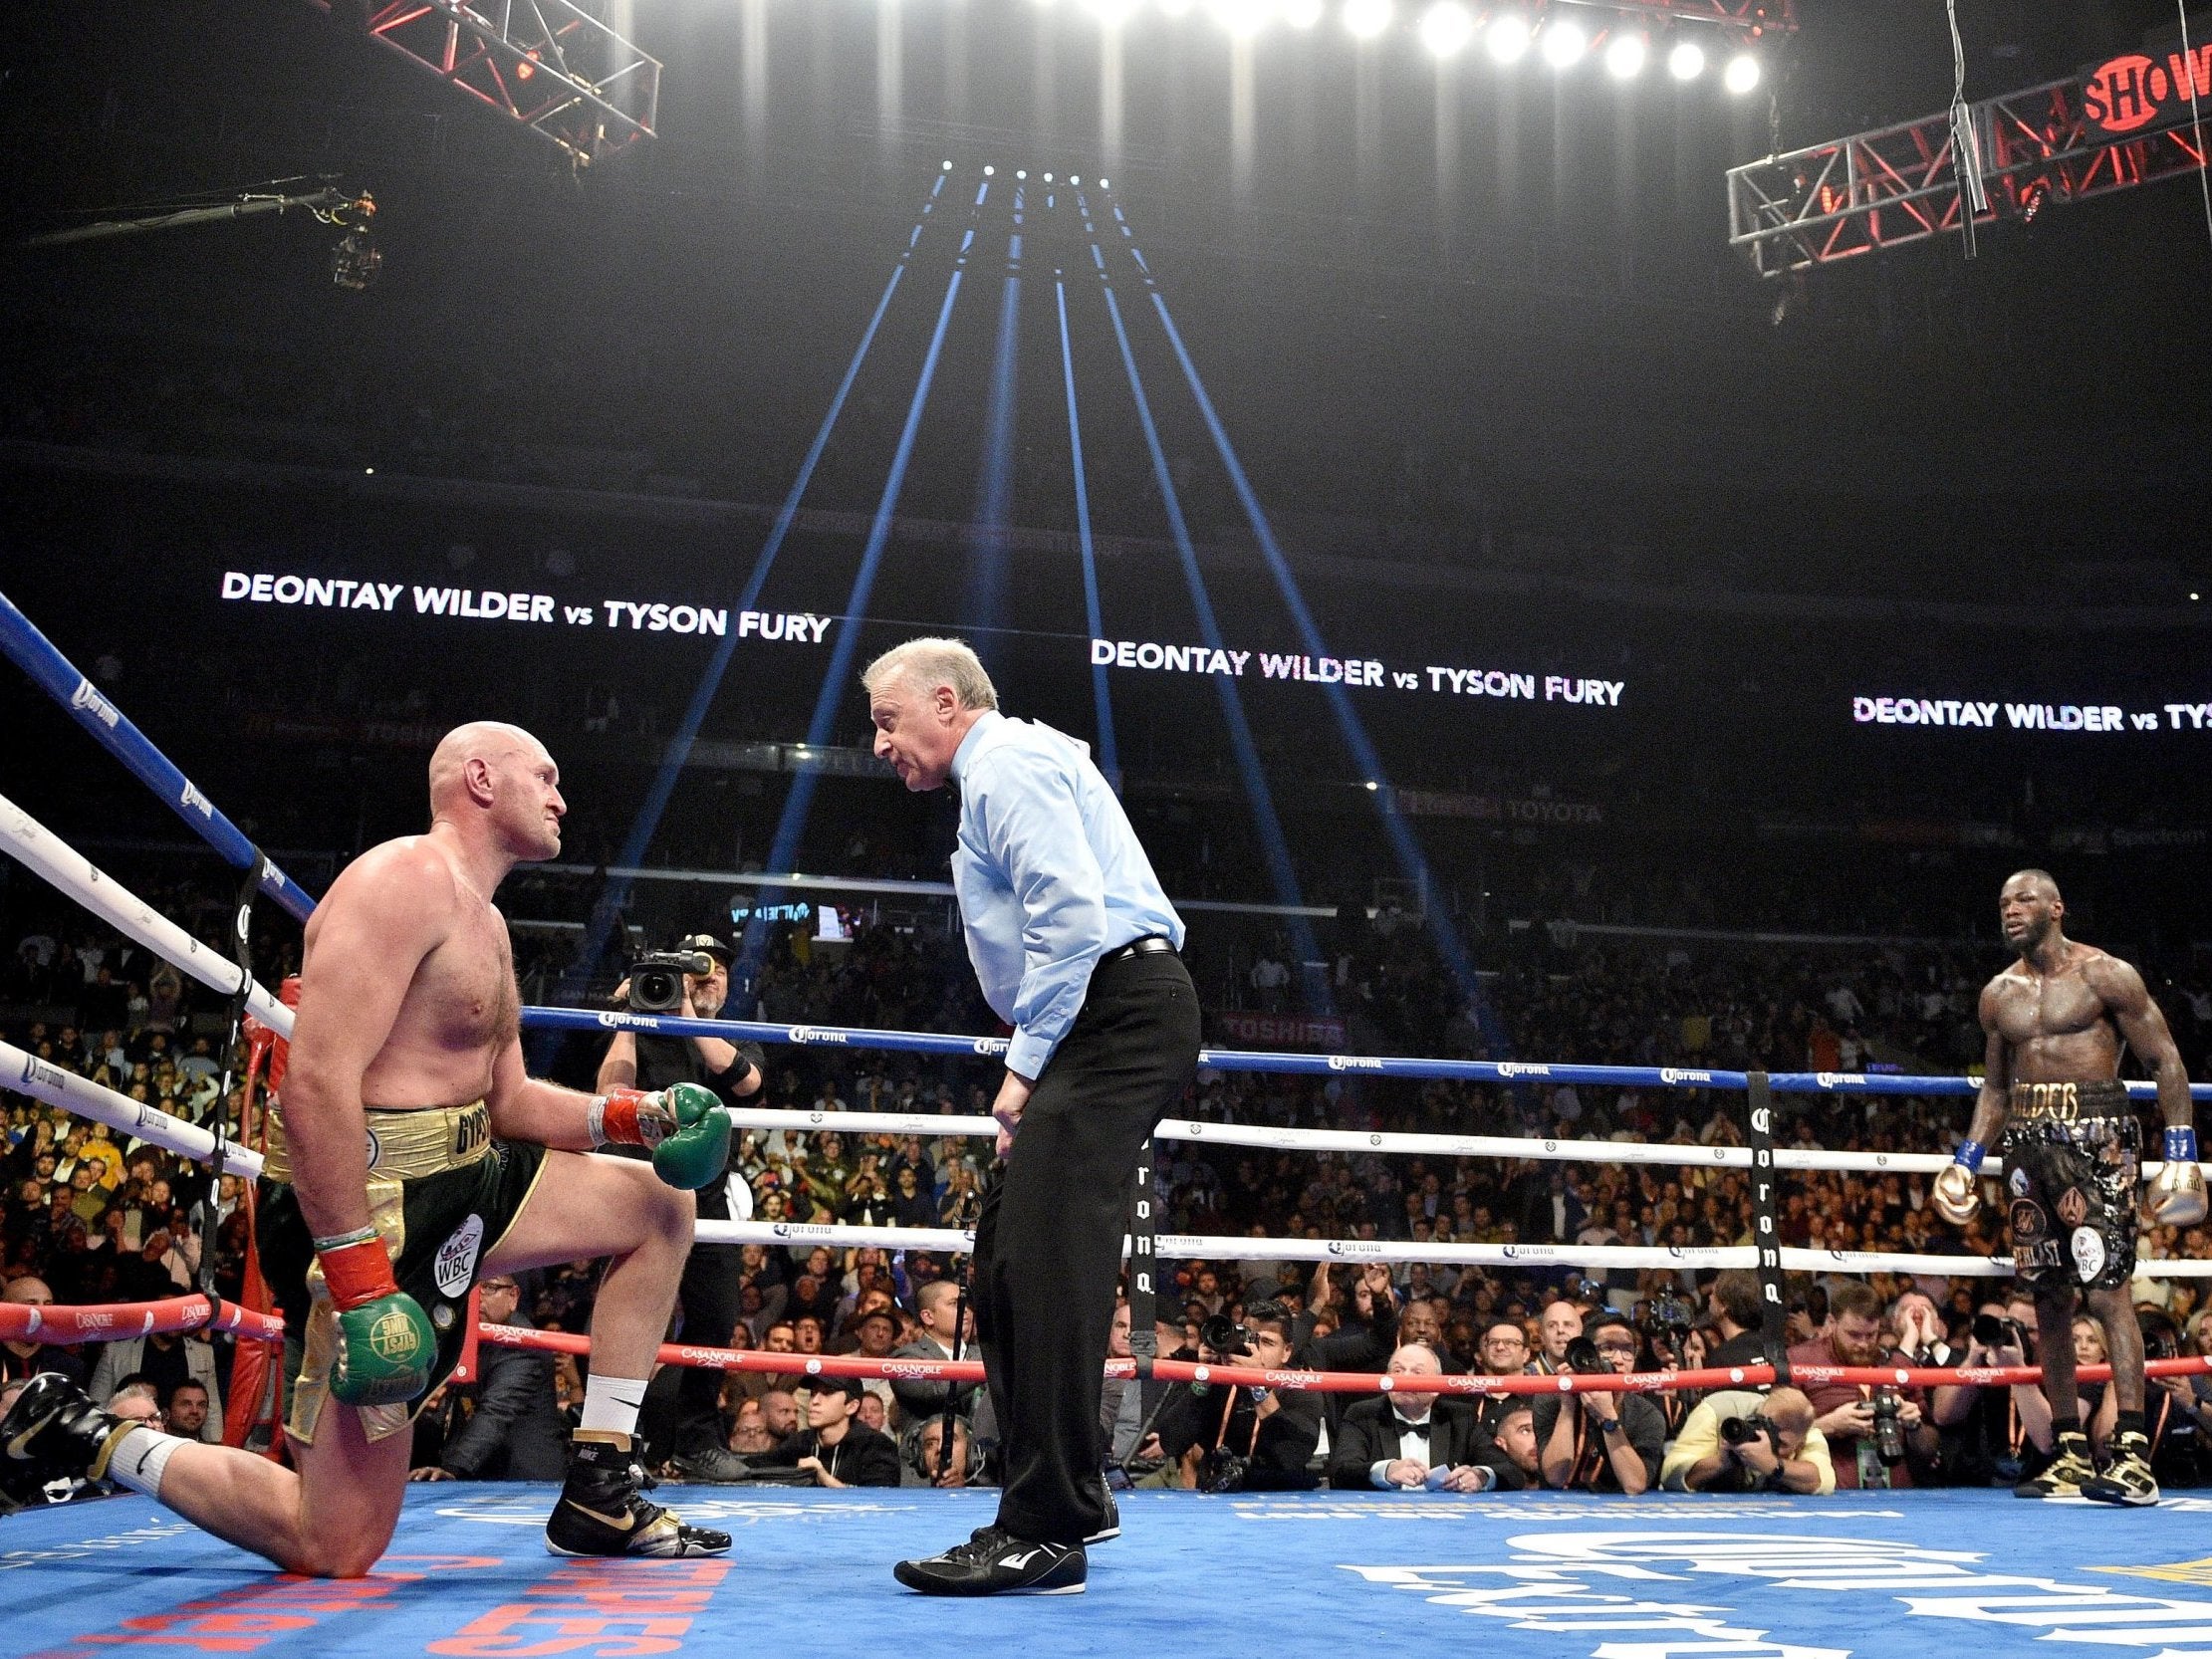 Tyson Fury’s bout against Deontay Wilder was watched by 10m via illegal streams